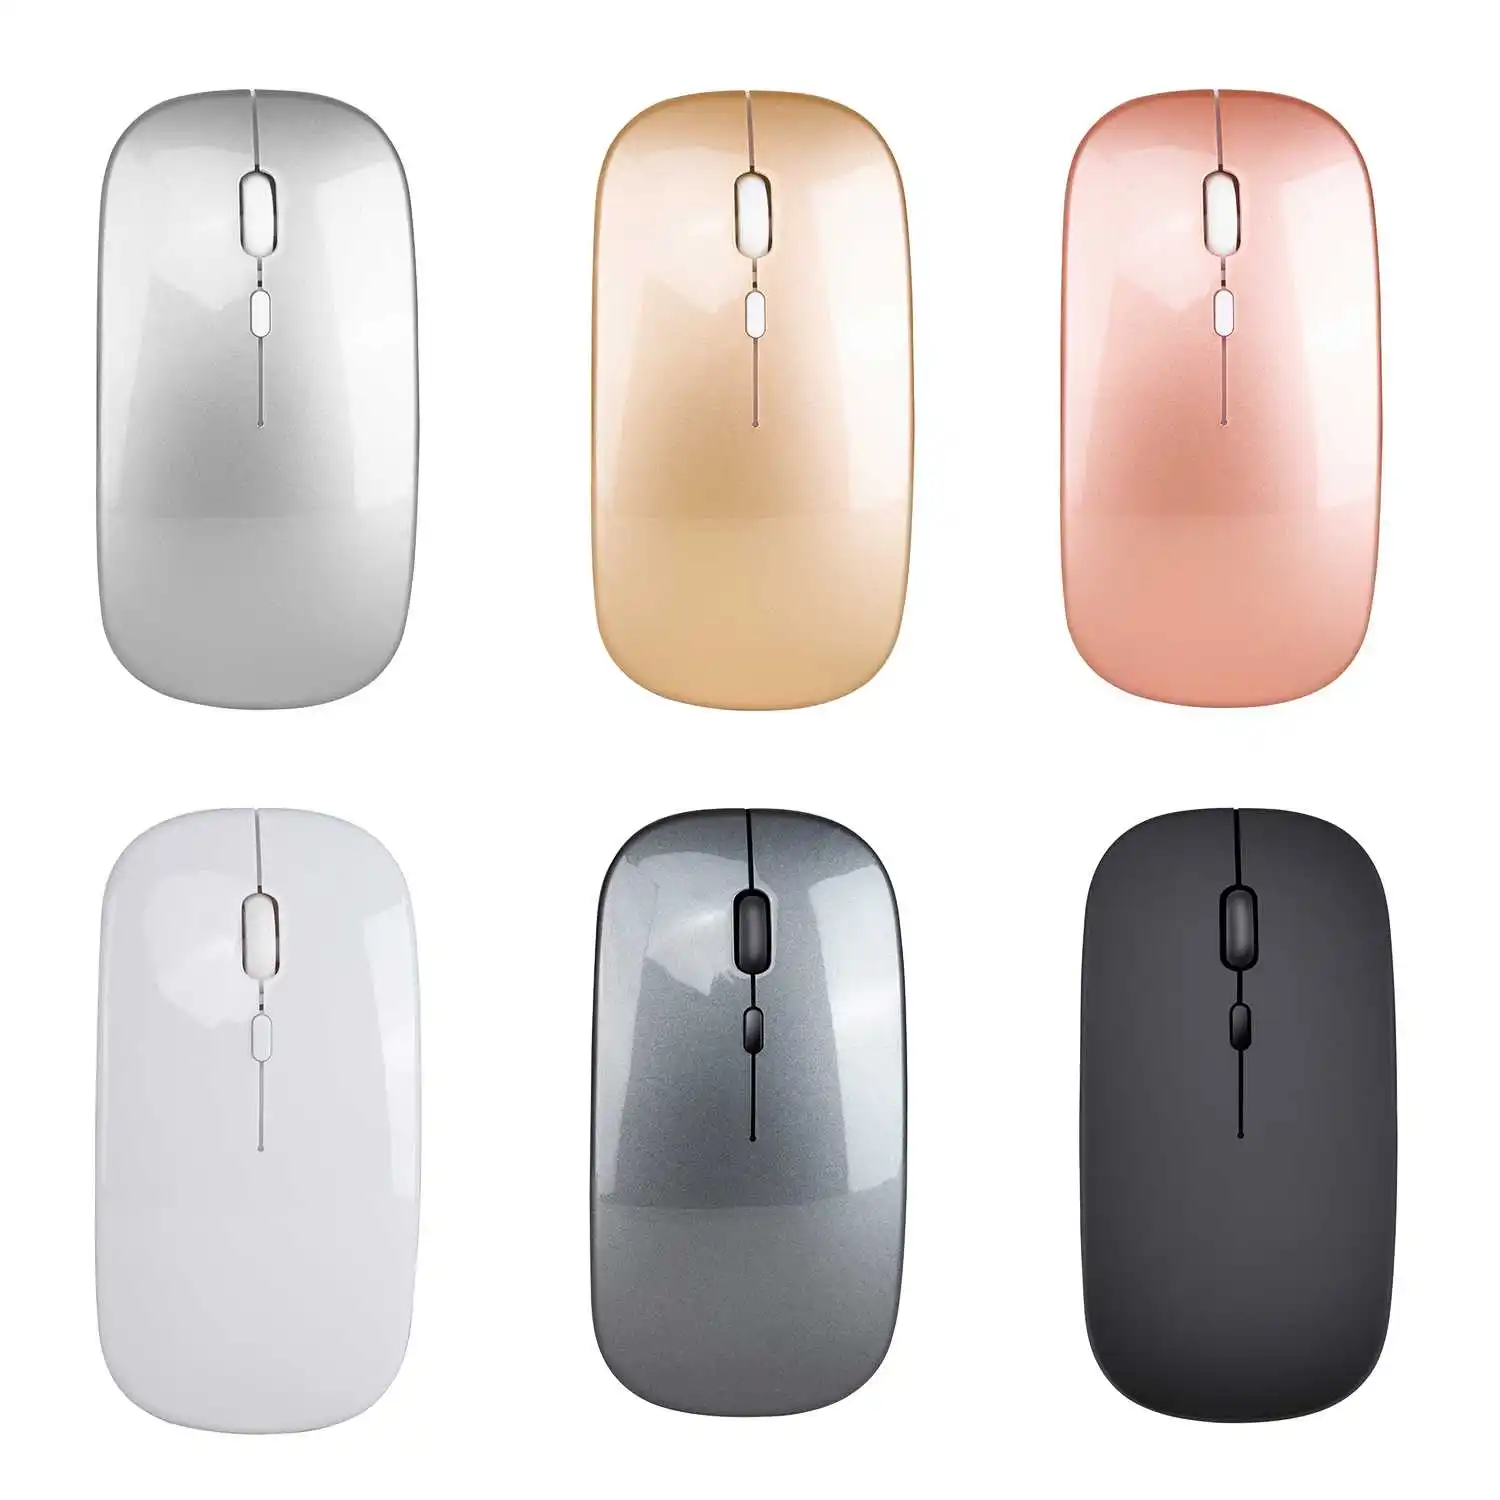 

LEORY M80 Wireless Mouse 1600DPI Chargeable 2.4GHz Wireless Mouse Silent Optical Office Mouse for Laptops Tablets